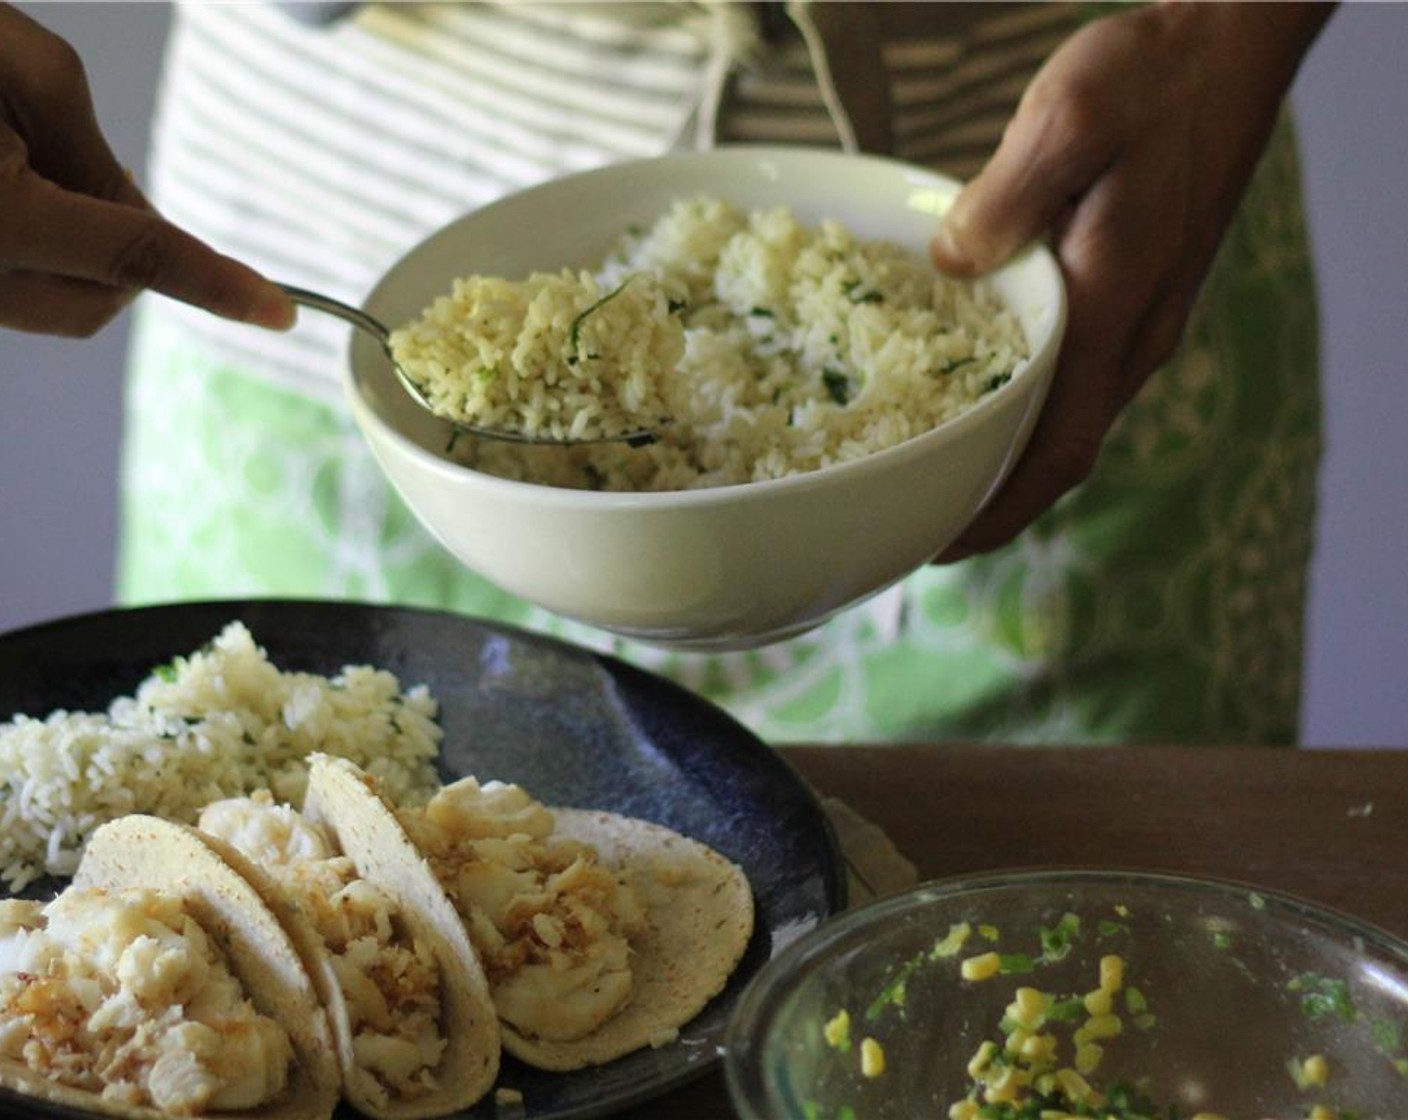 step 6 Stir in remaining lime zest, juice, and cilantro into the cooked rice before serving. Add salt and pepper to taste if desired.